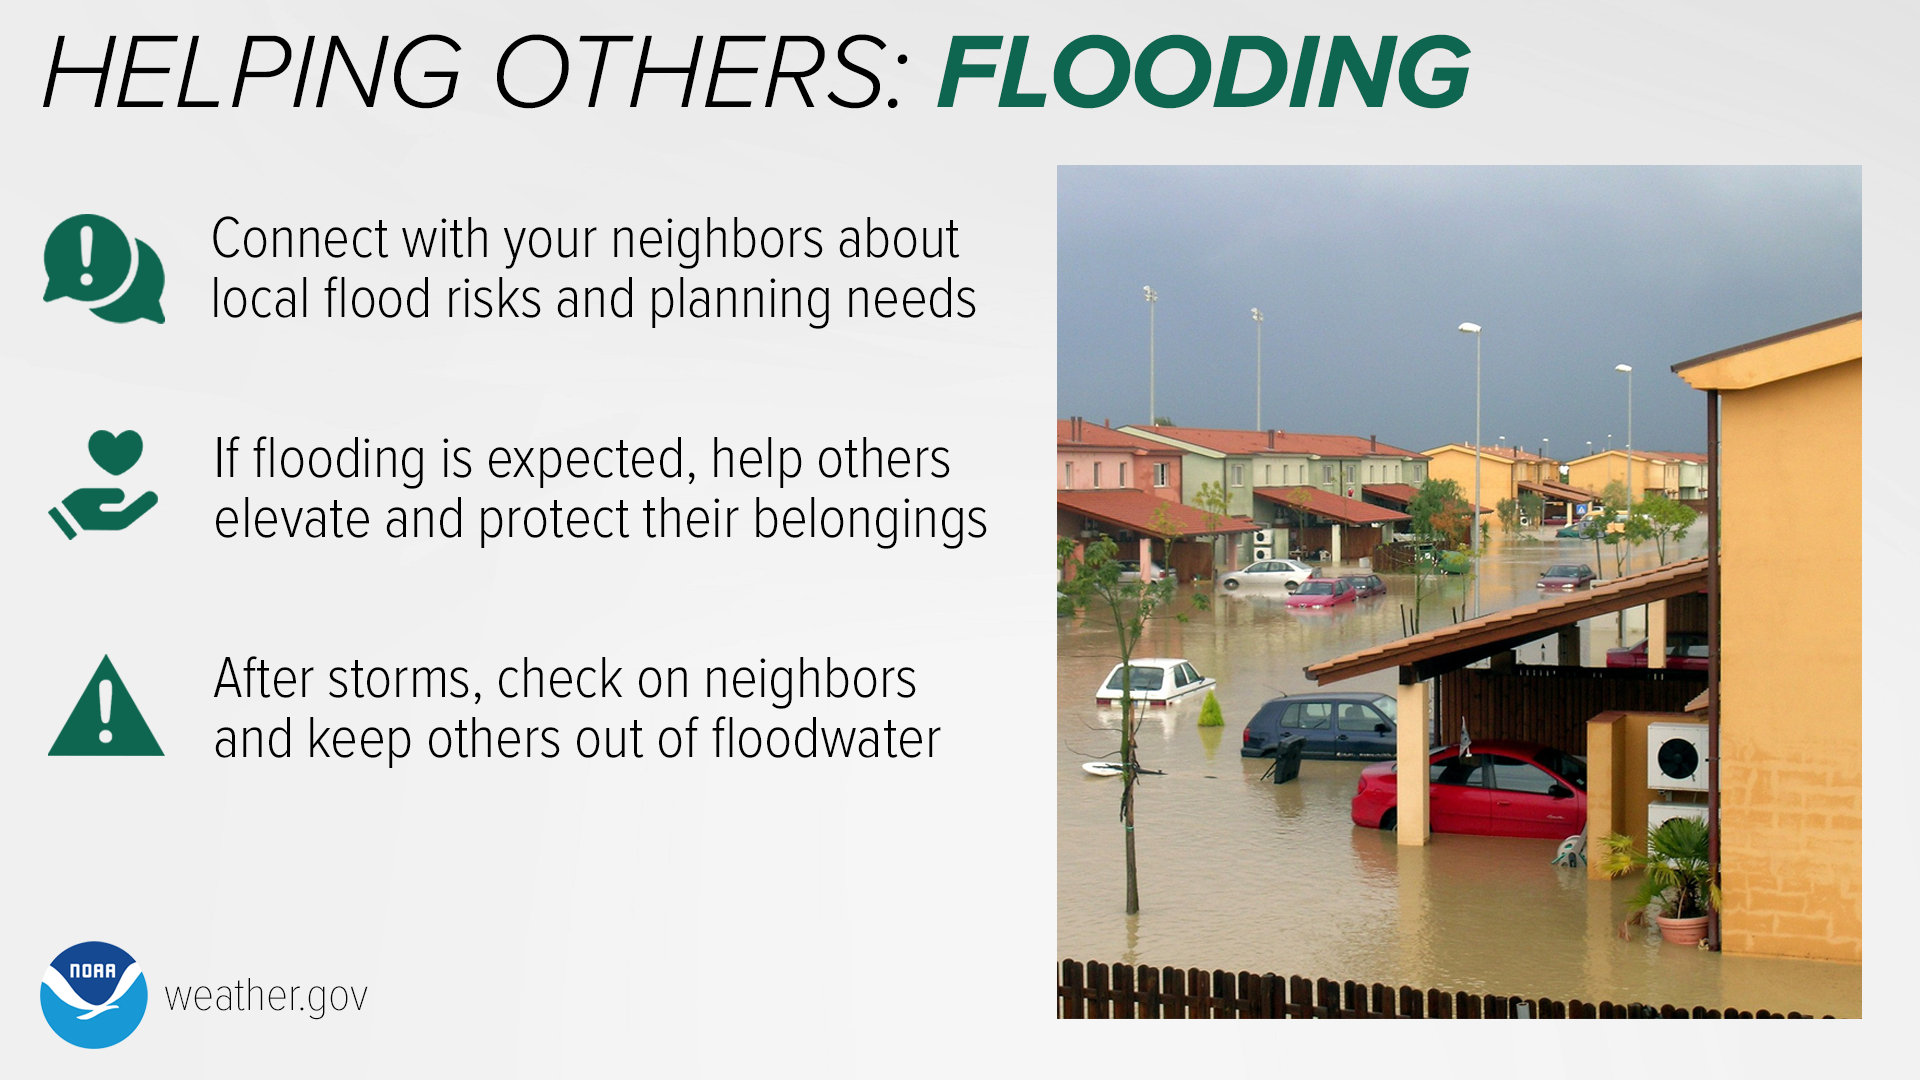 Helping Others: Flooding. Connect with your neighbors about local flood risks and planning needs. If flooding is expected, help others elevate and protect their belongings. After storms, check on neighbors and keep others out of floodwater.